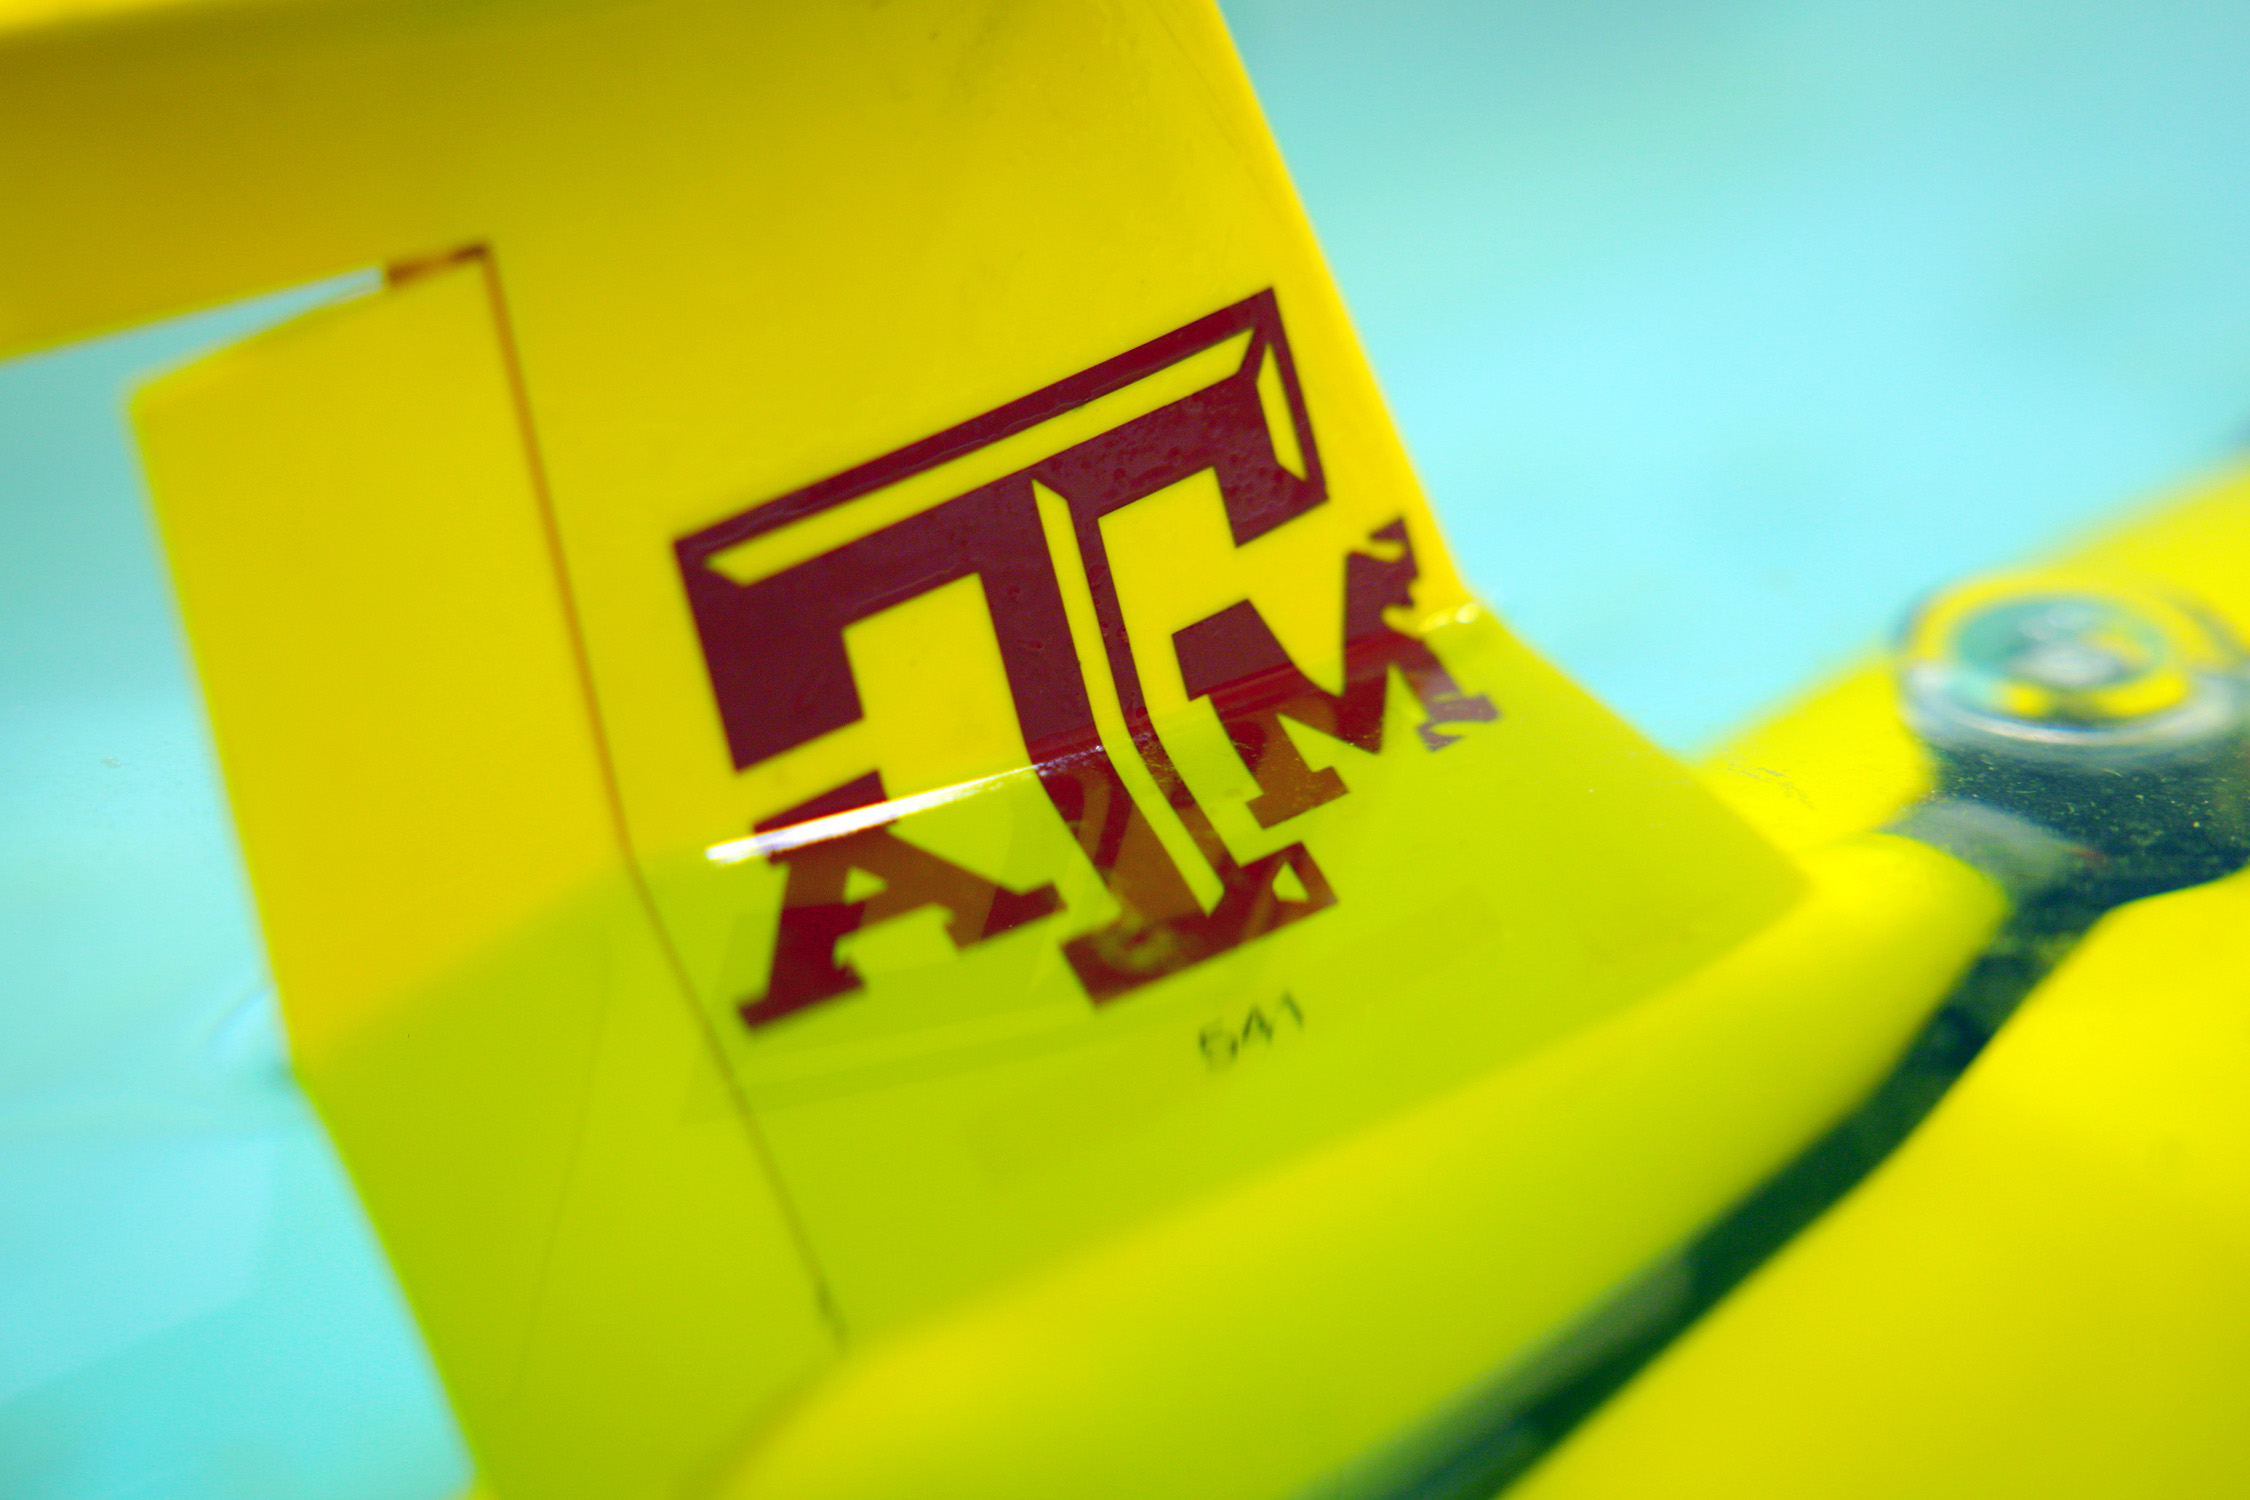 A yellow glider featuring a maroon Texas A&amp;M University logo floats in a pool of water within a Geochemical and Environmental Research Group laboratory